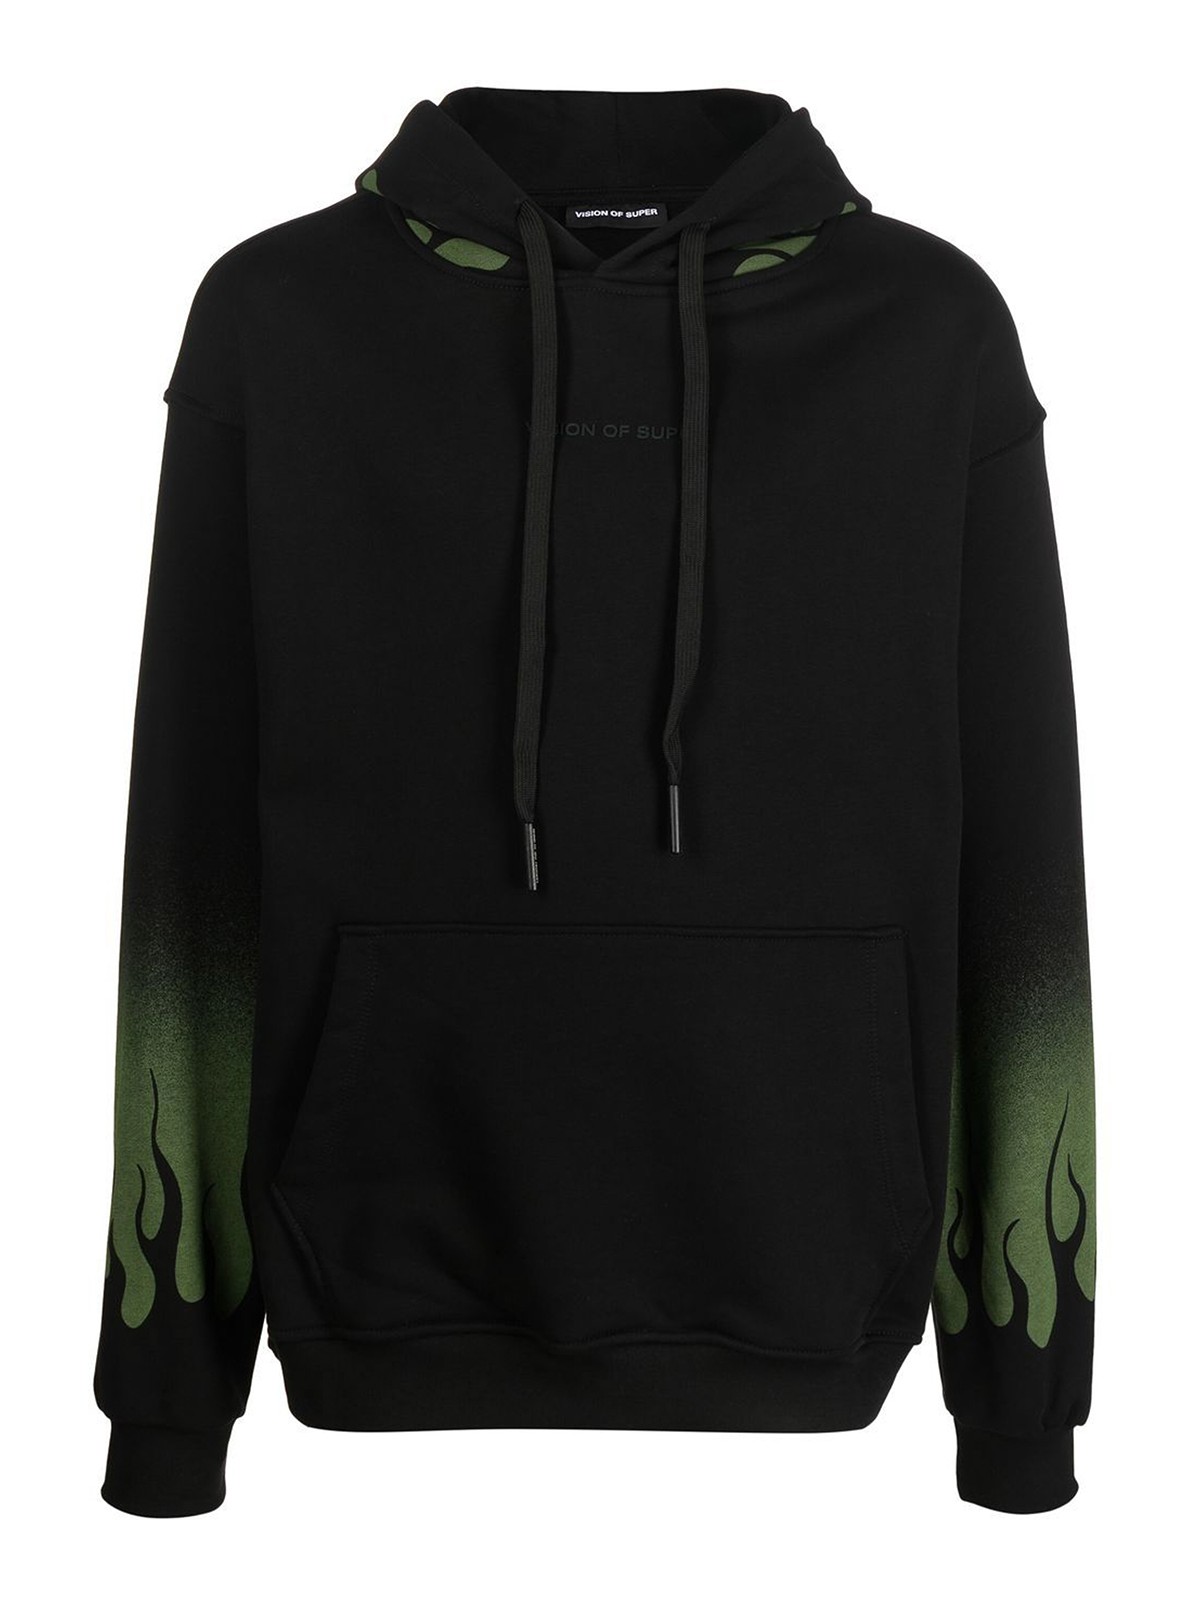 Vision Of Super Hoodie With Negative Flames In Black